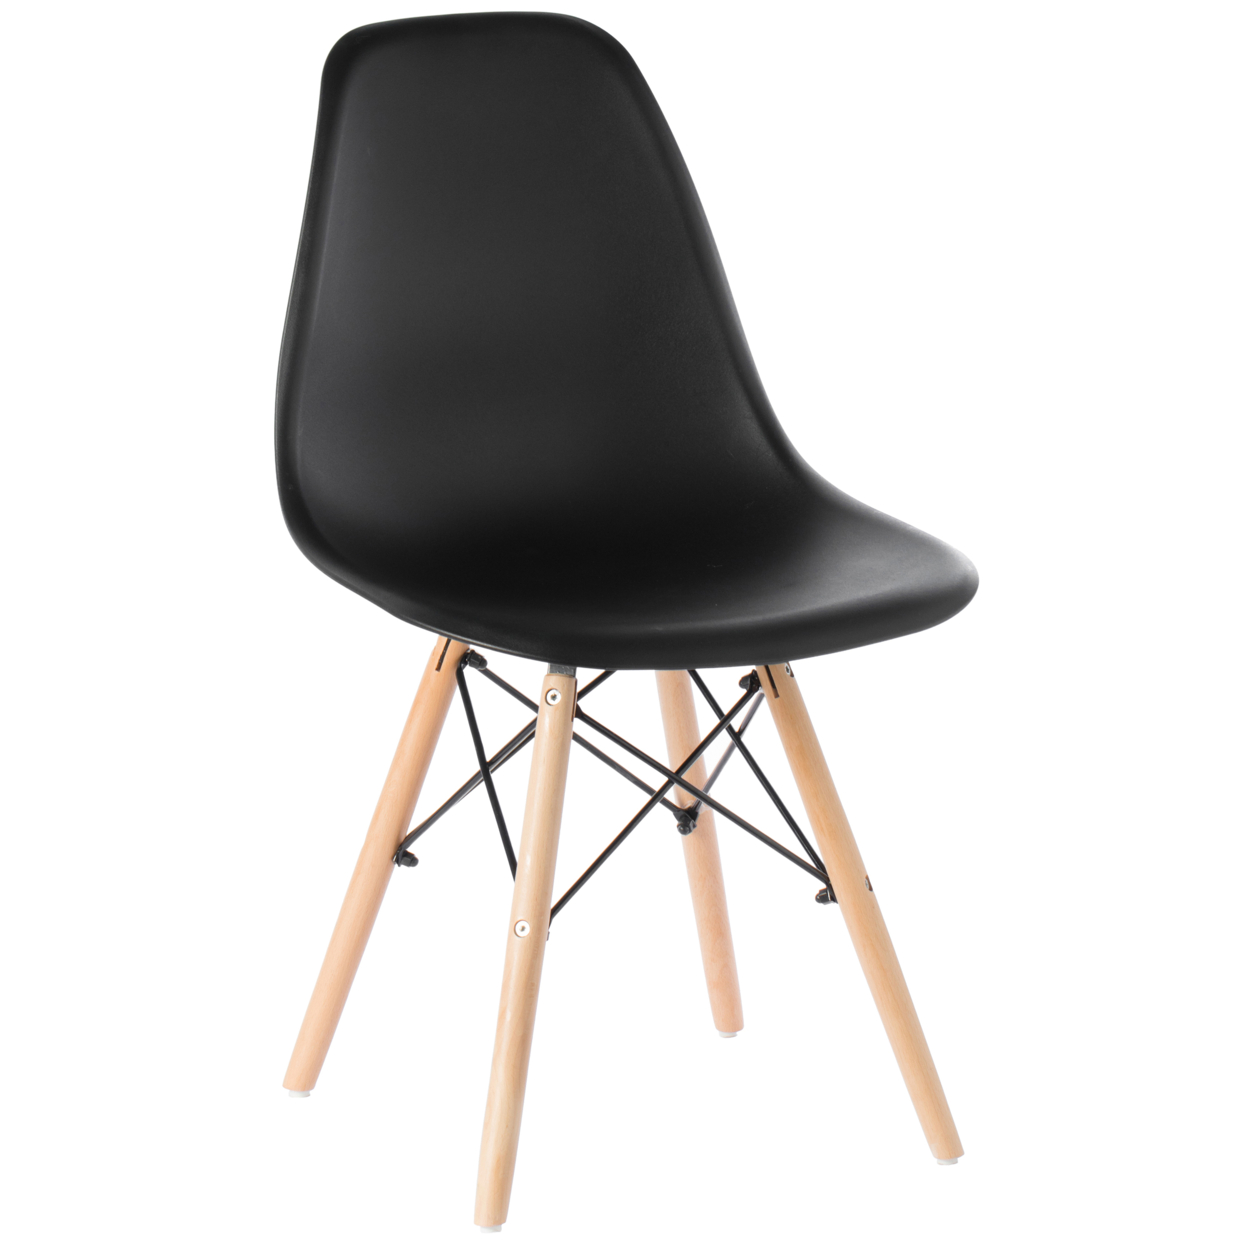 Mid-Century Modern Style Plastic DSW Shell Dining Chair With Solid Beech Wooden Dowel Eiffel Legs - Set Of 4 Black